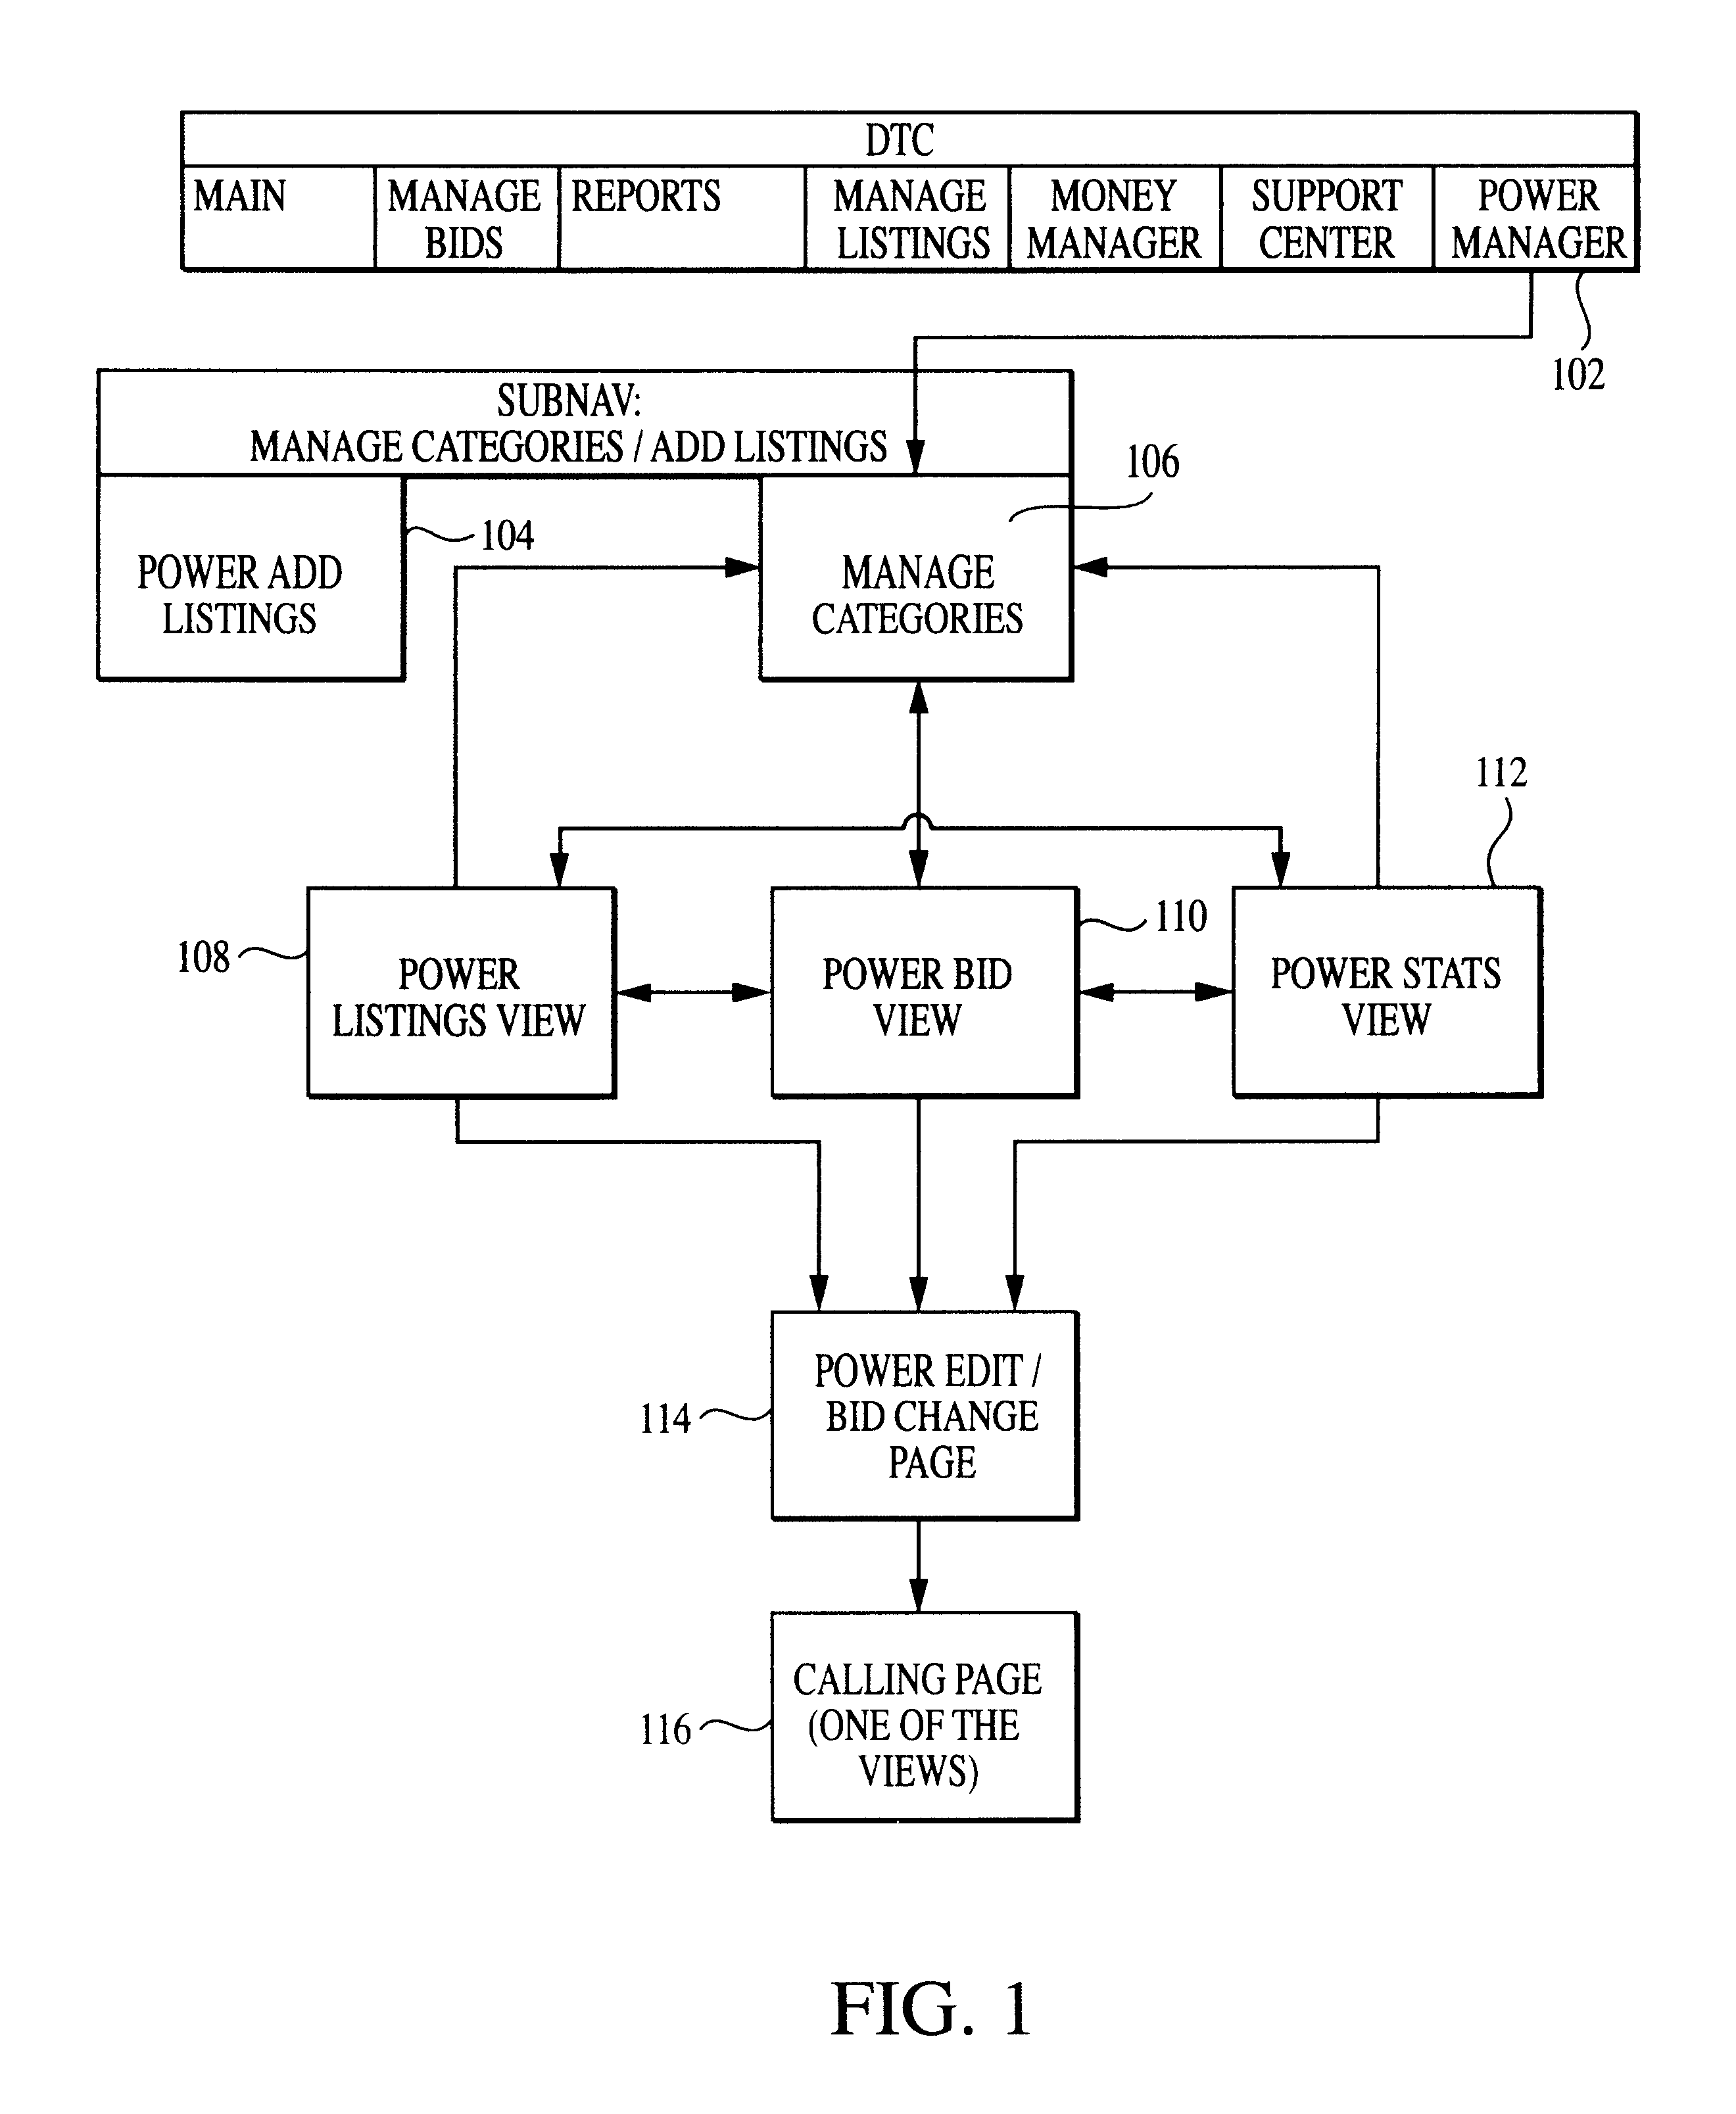 System and method allowing advertisers to manage search listings in a pay for placement search system using grouping